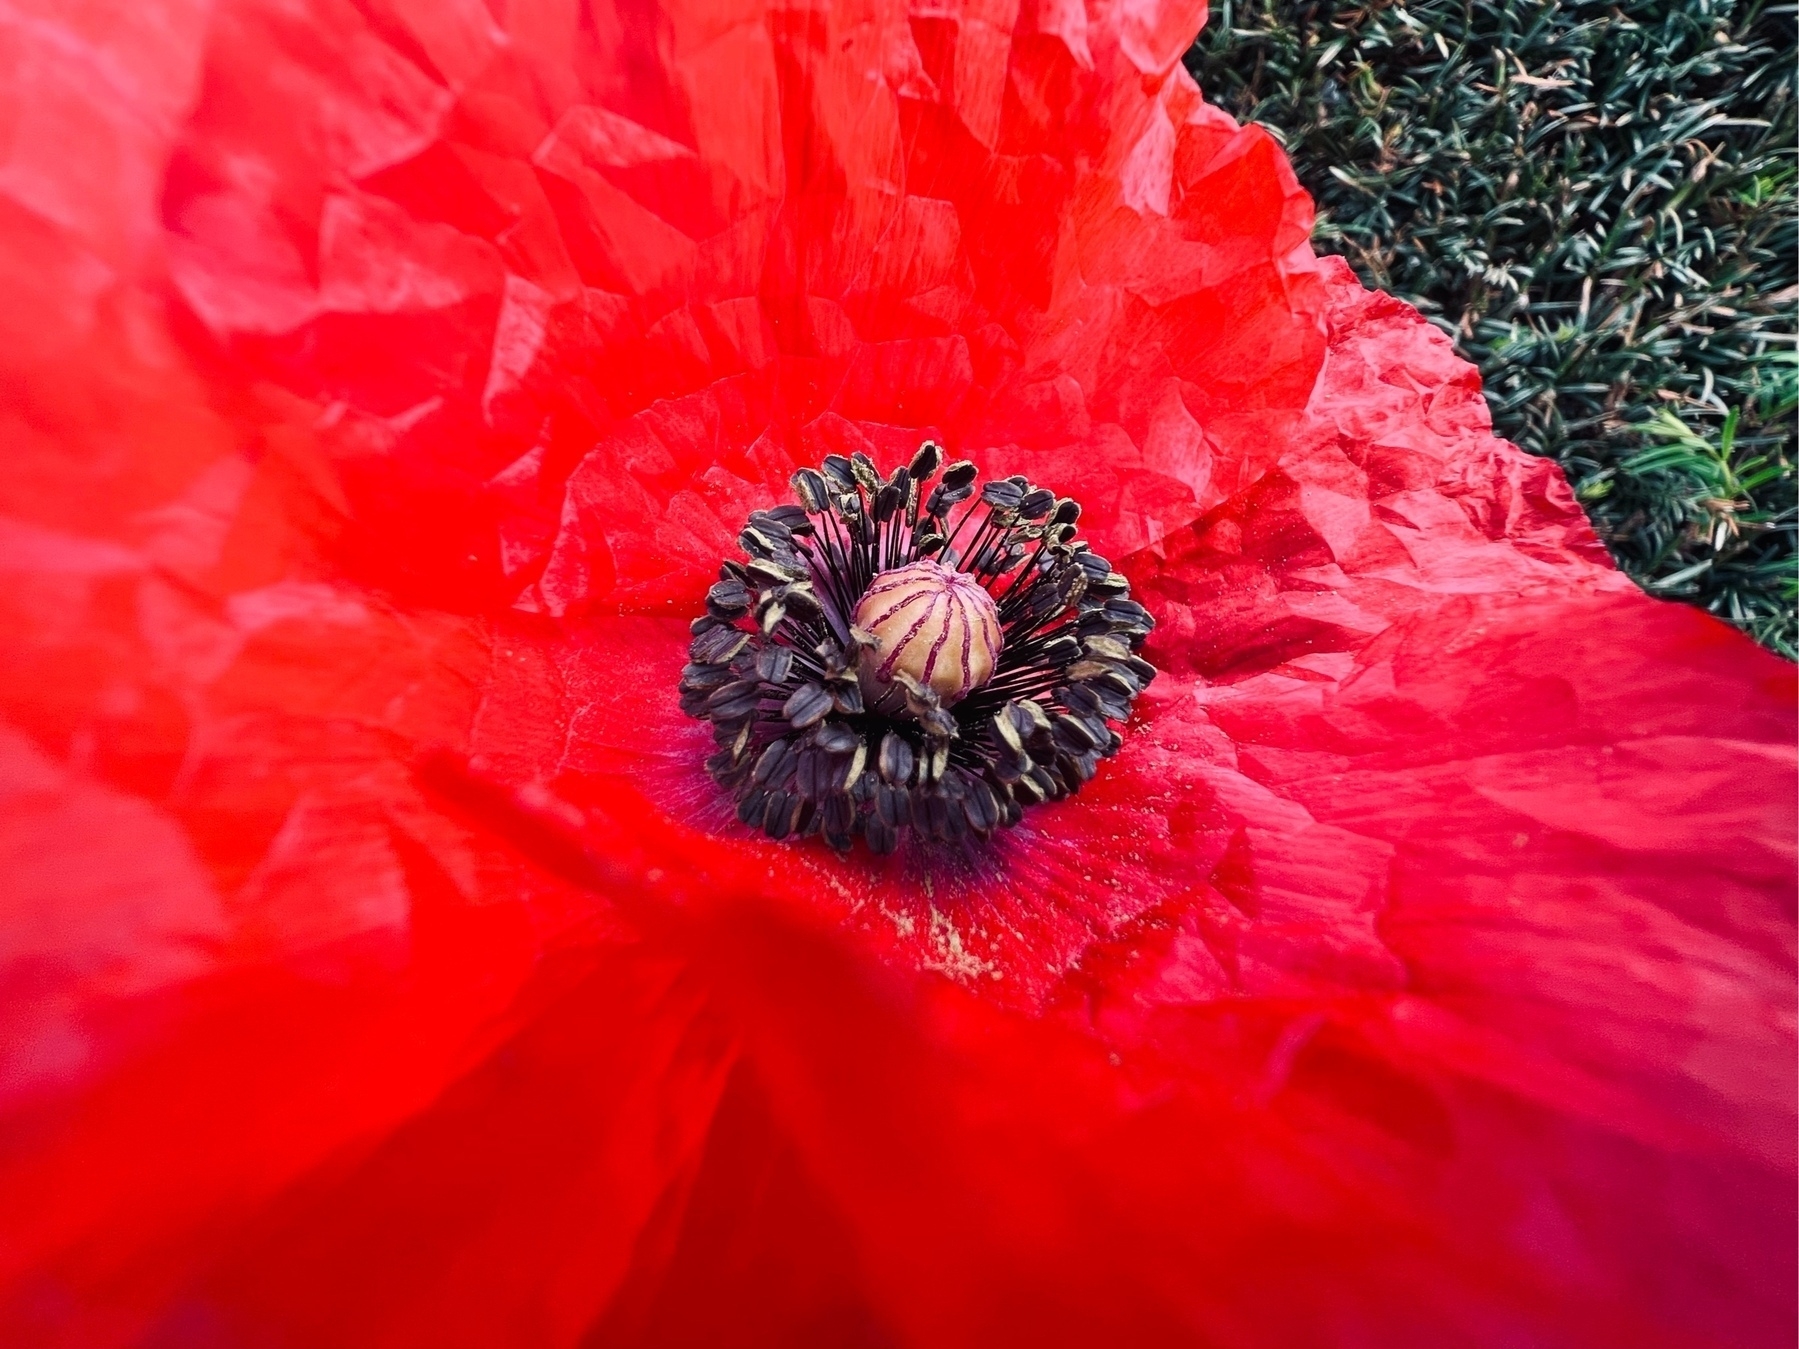 Closeup of the center of a red poppy. The majority of the frame is taken up by the red petals of the flower, with a green bush seen in the backgrpund in the top right corner. 